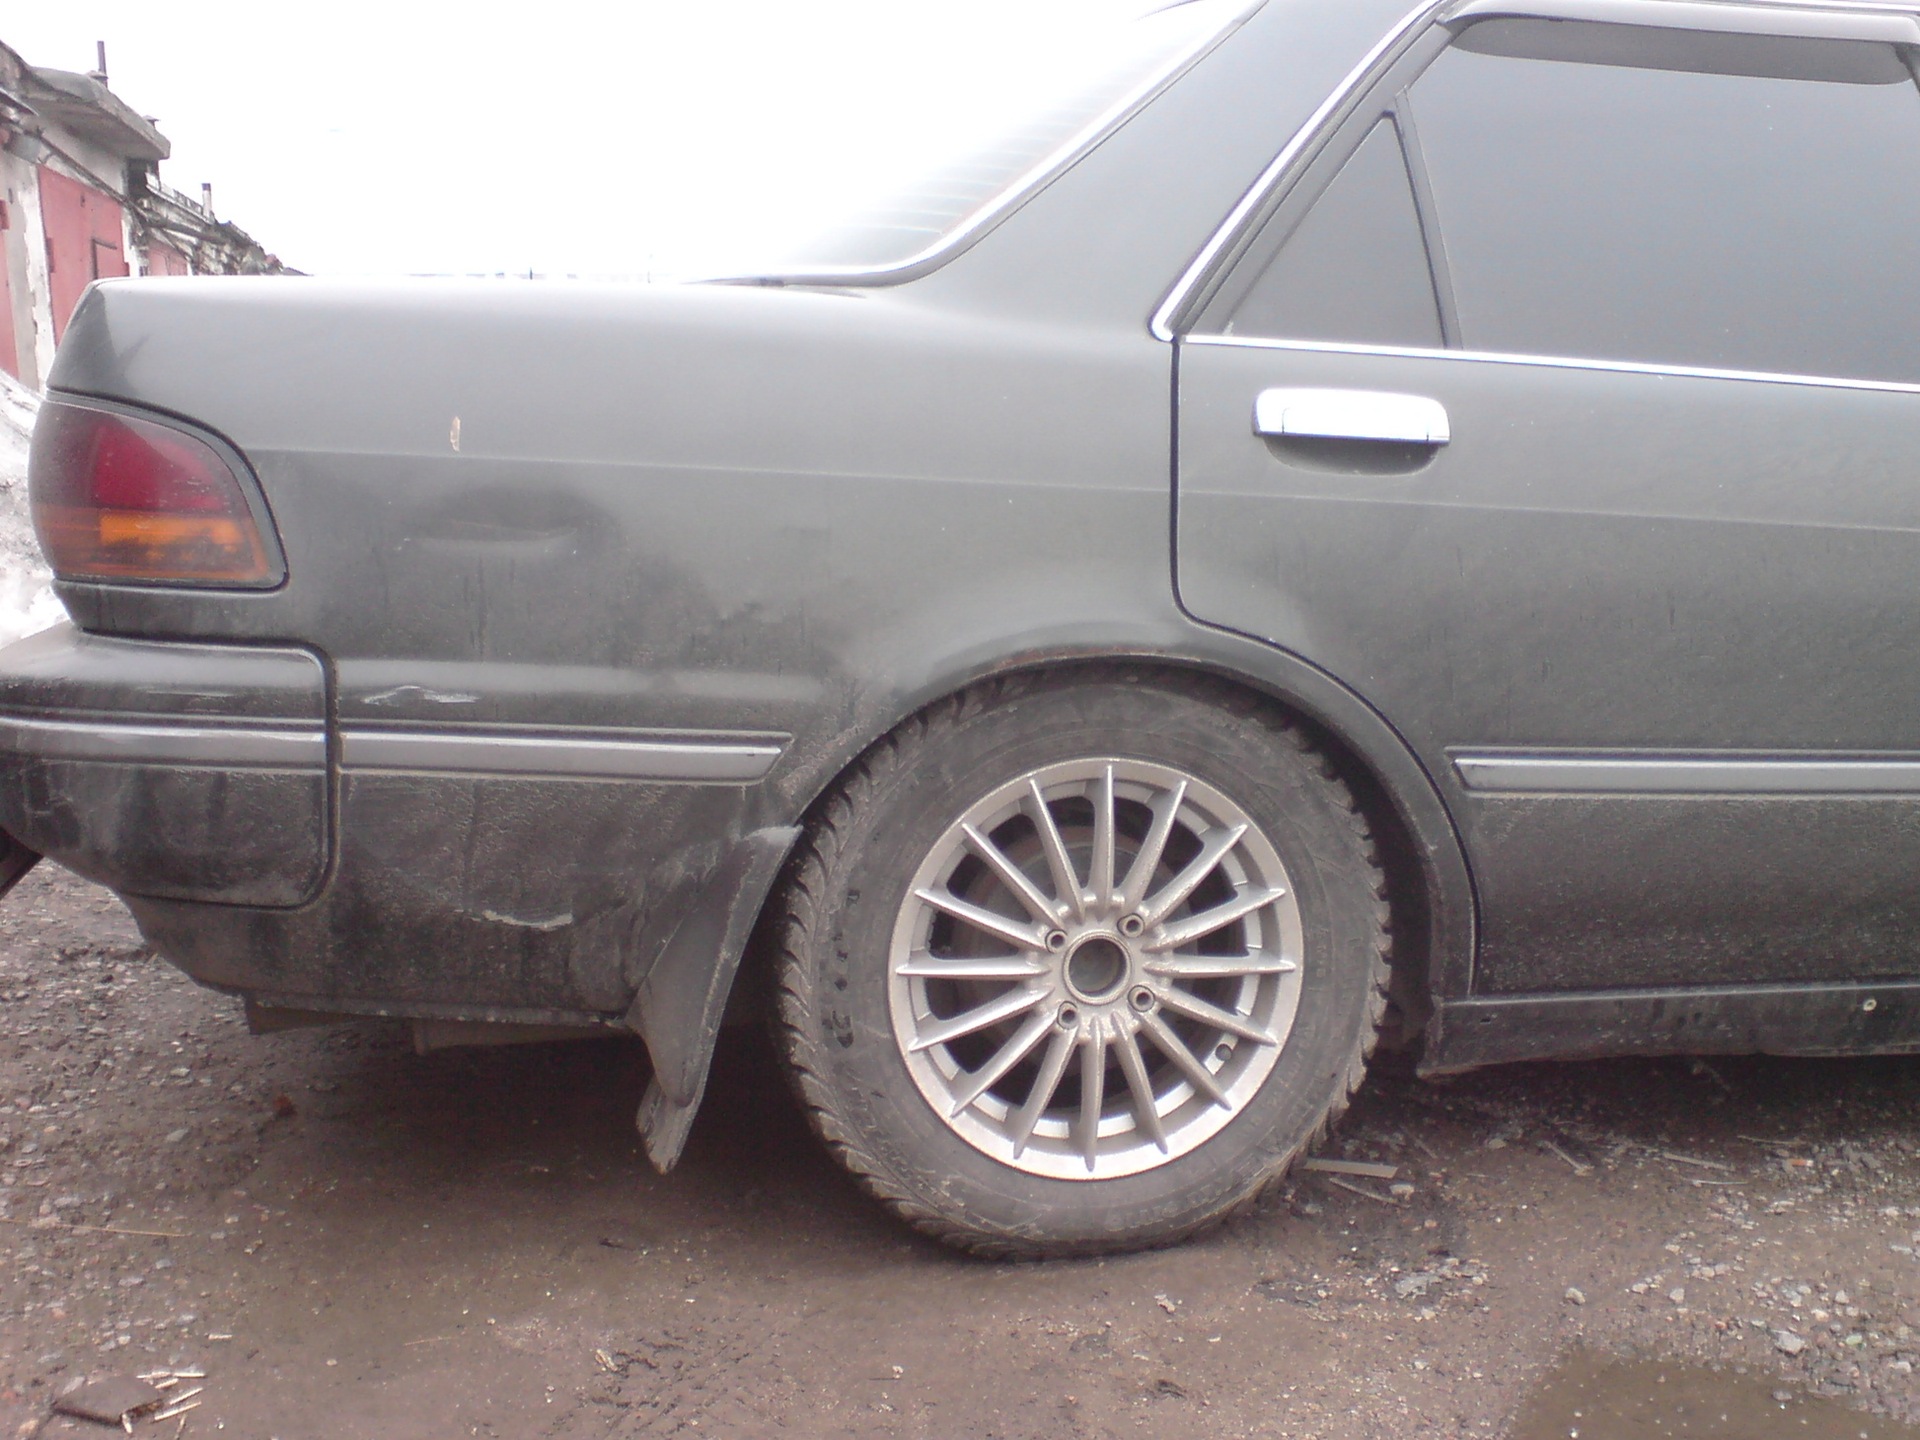 We cut off the excess  - Toyota Carina 20 L 1991